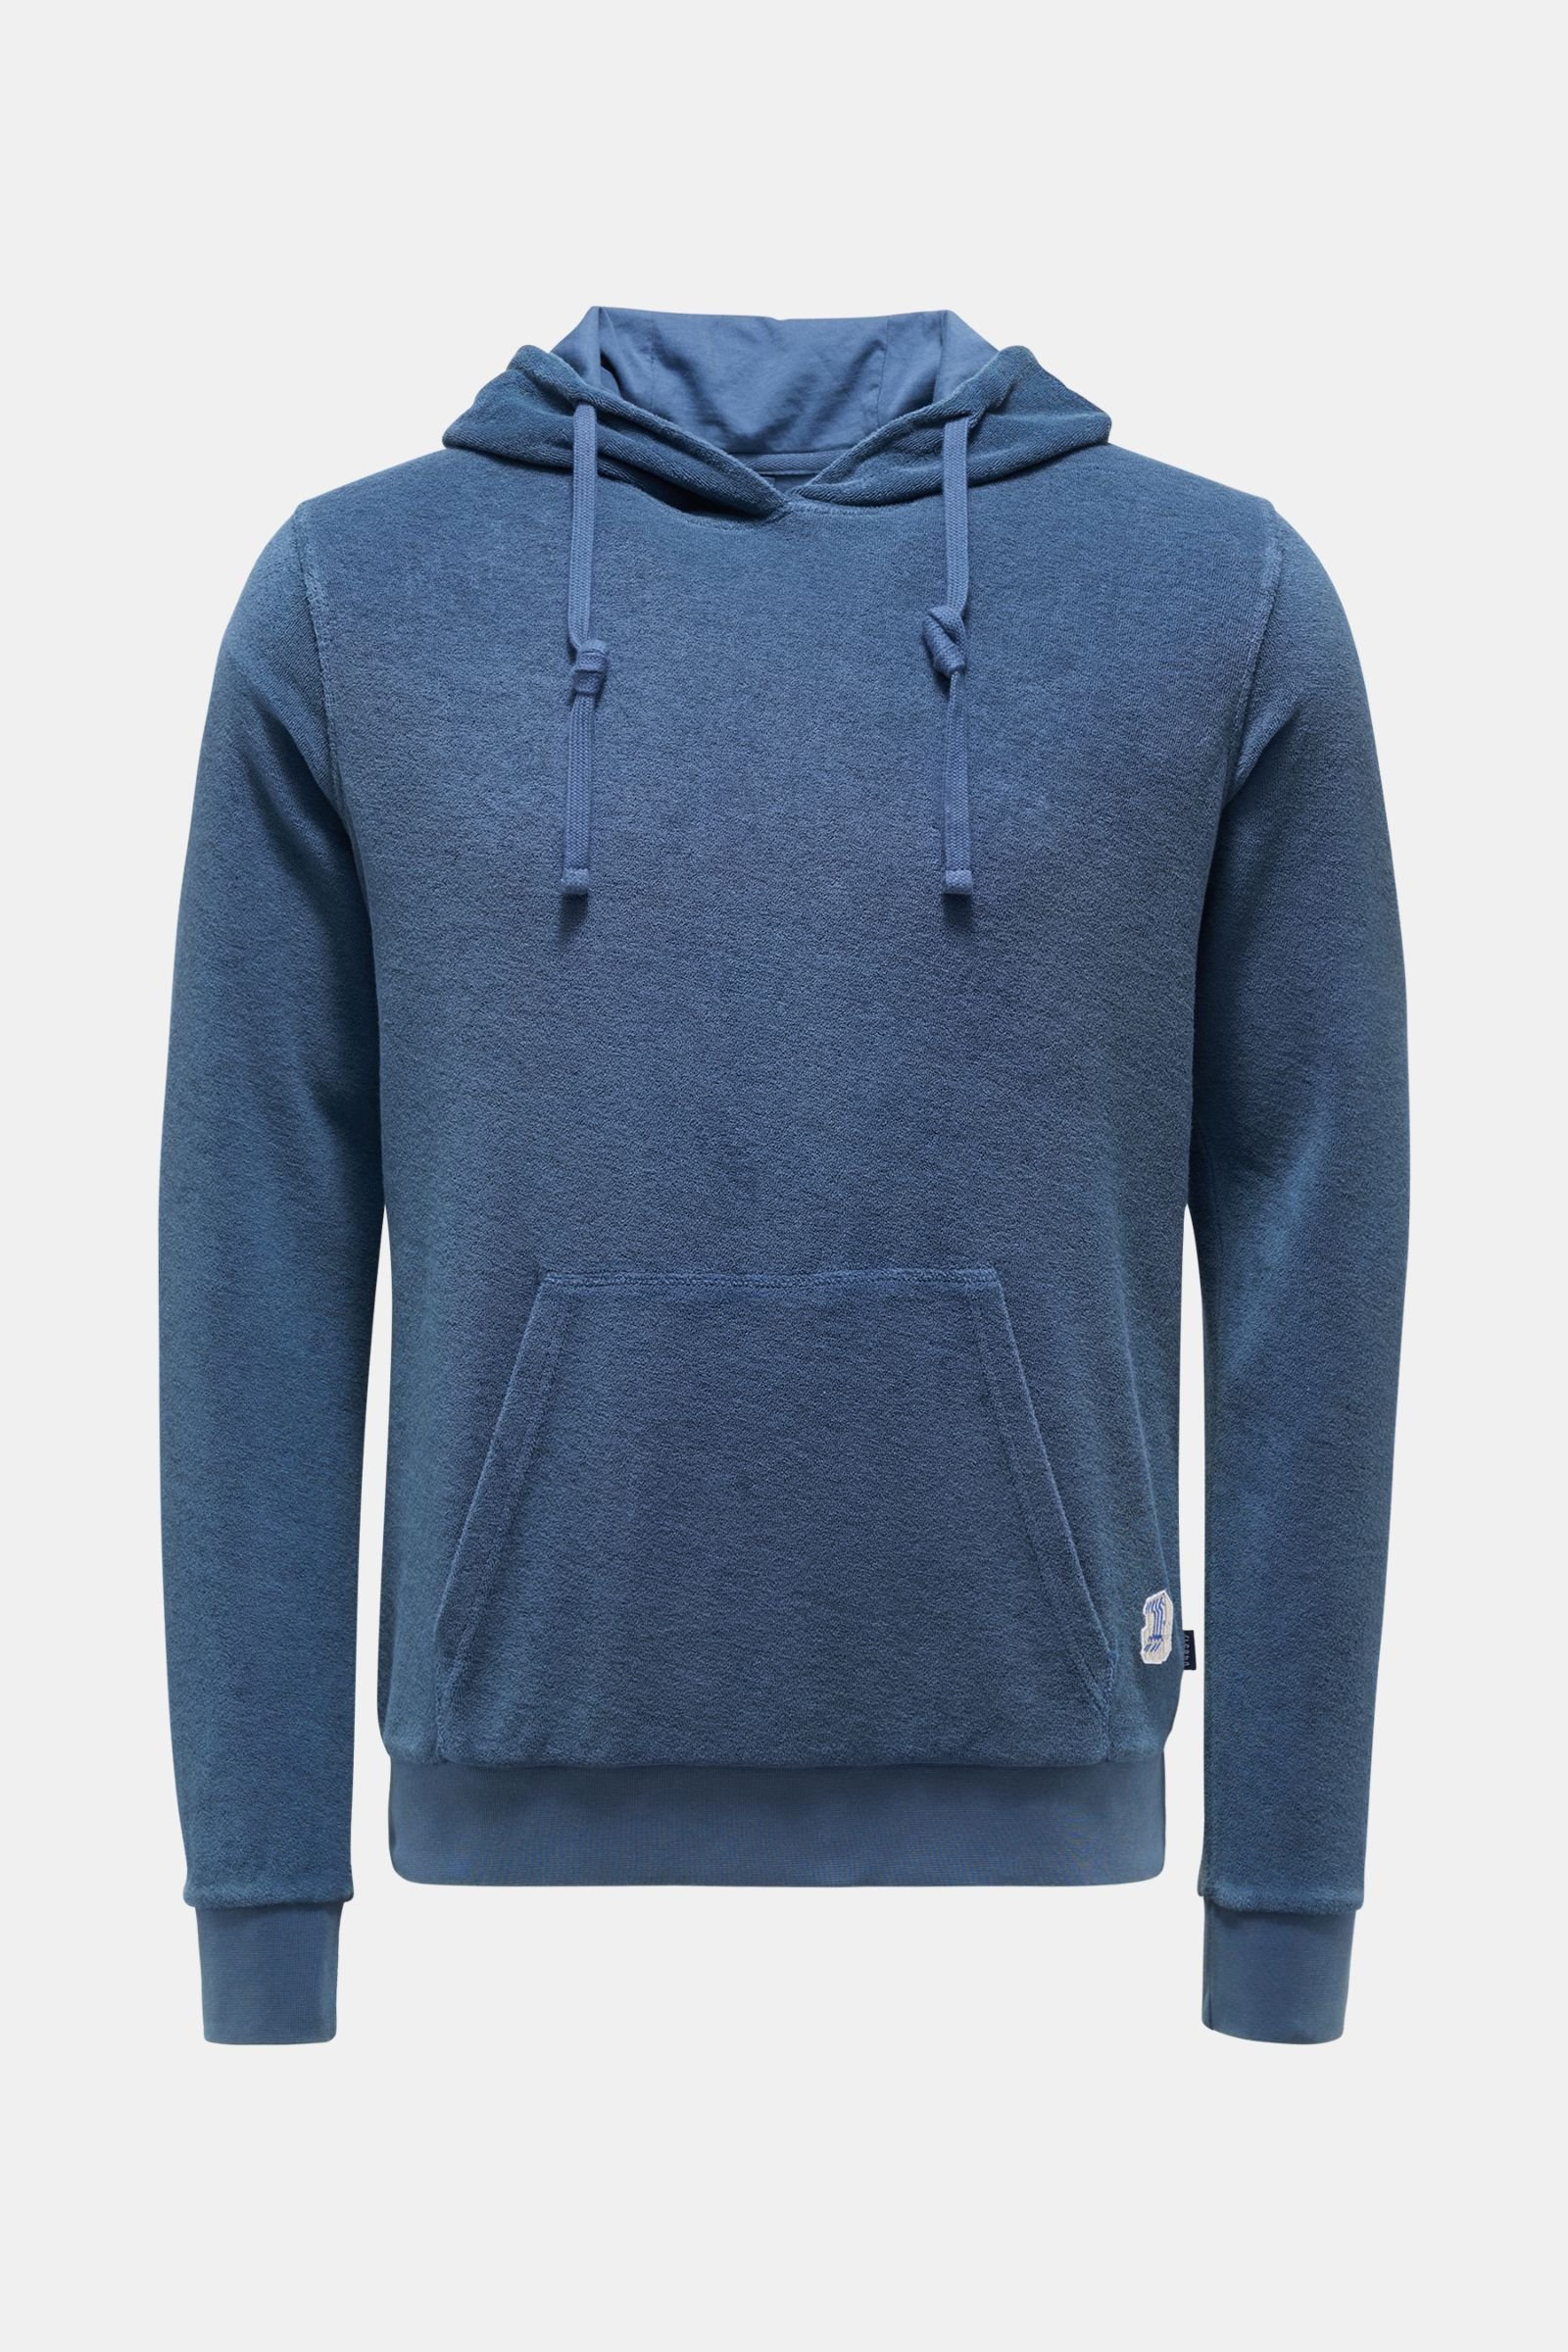 Terry hooded jumper grey-blue